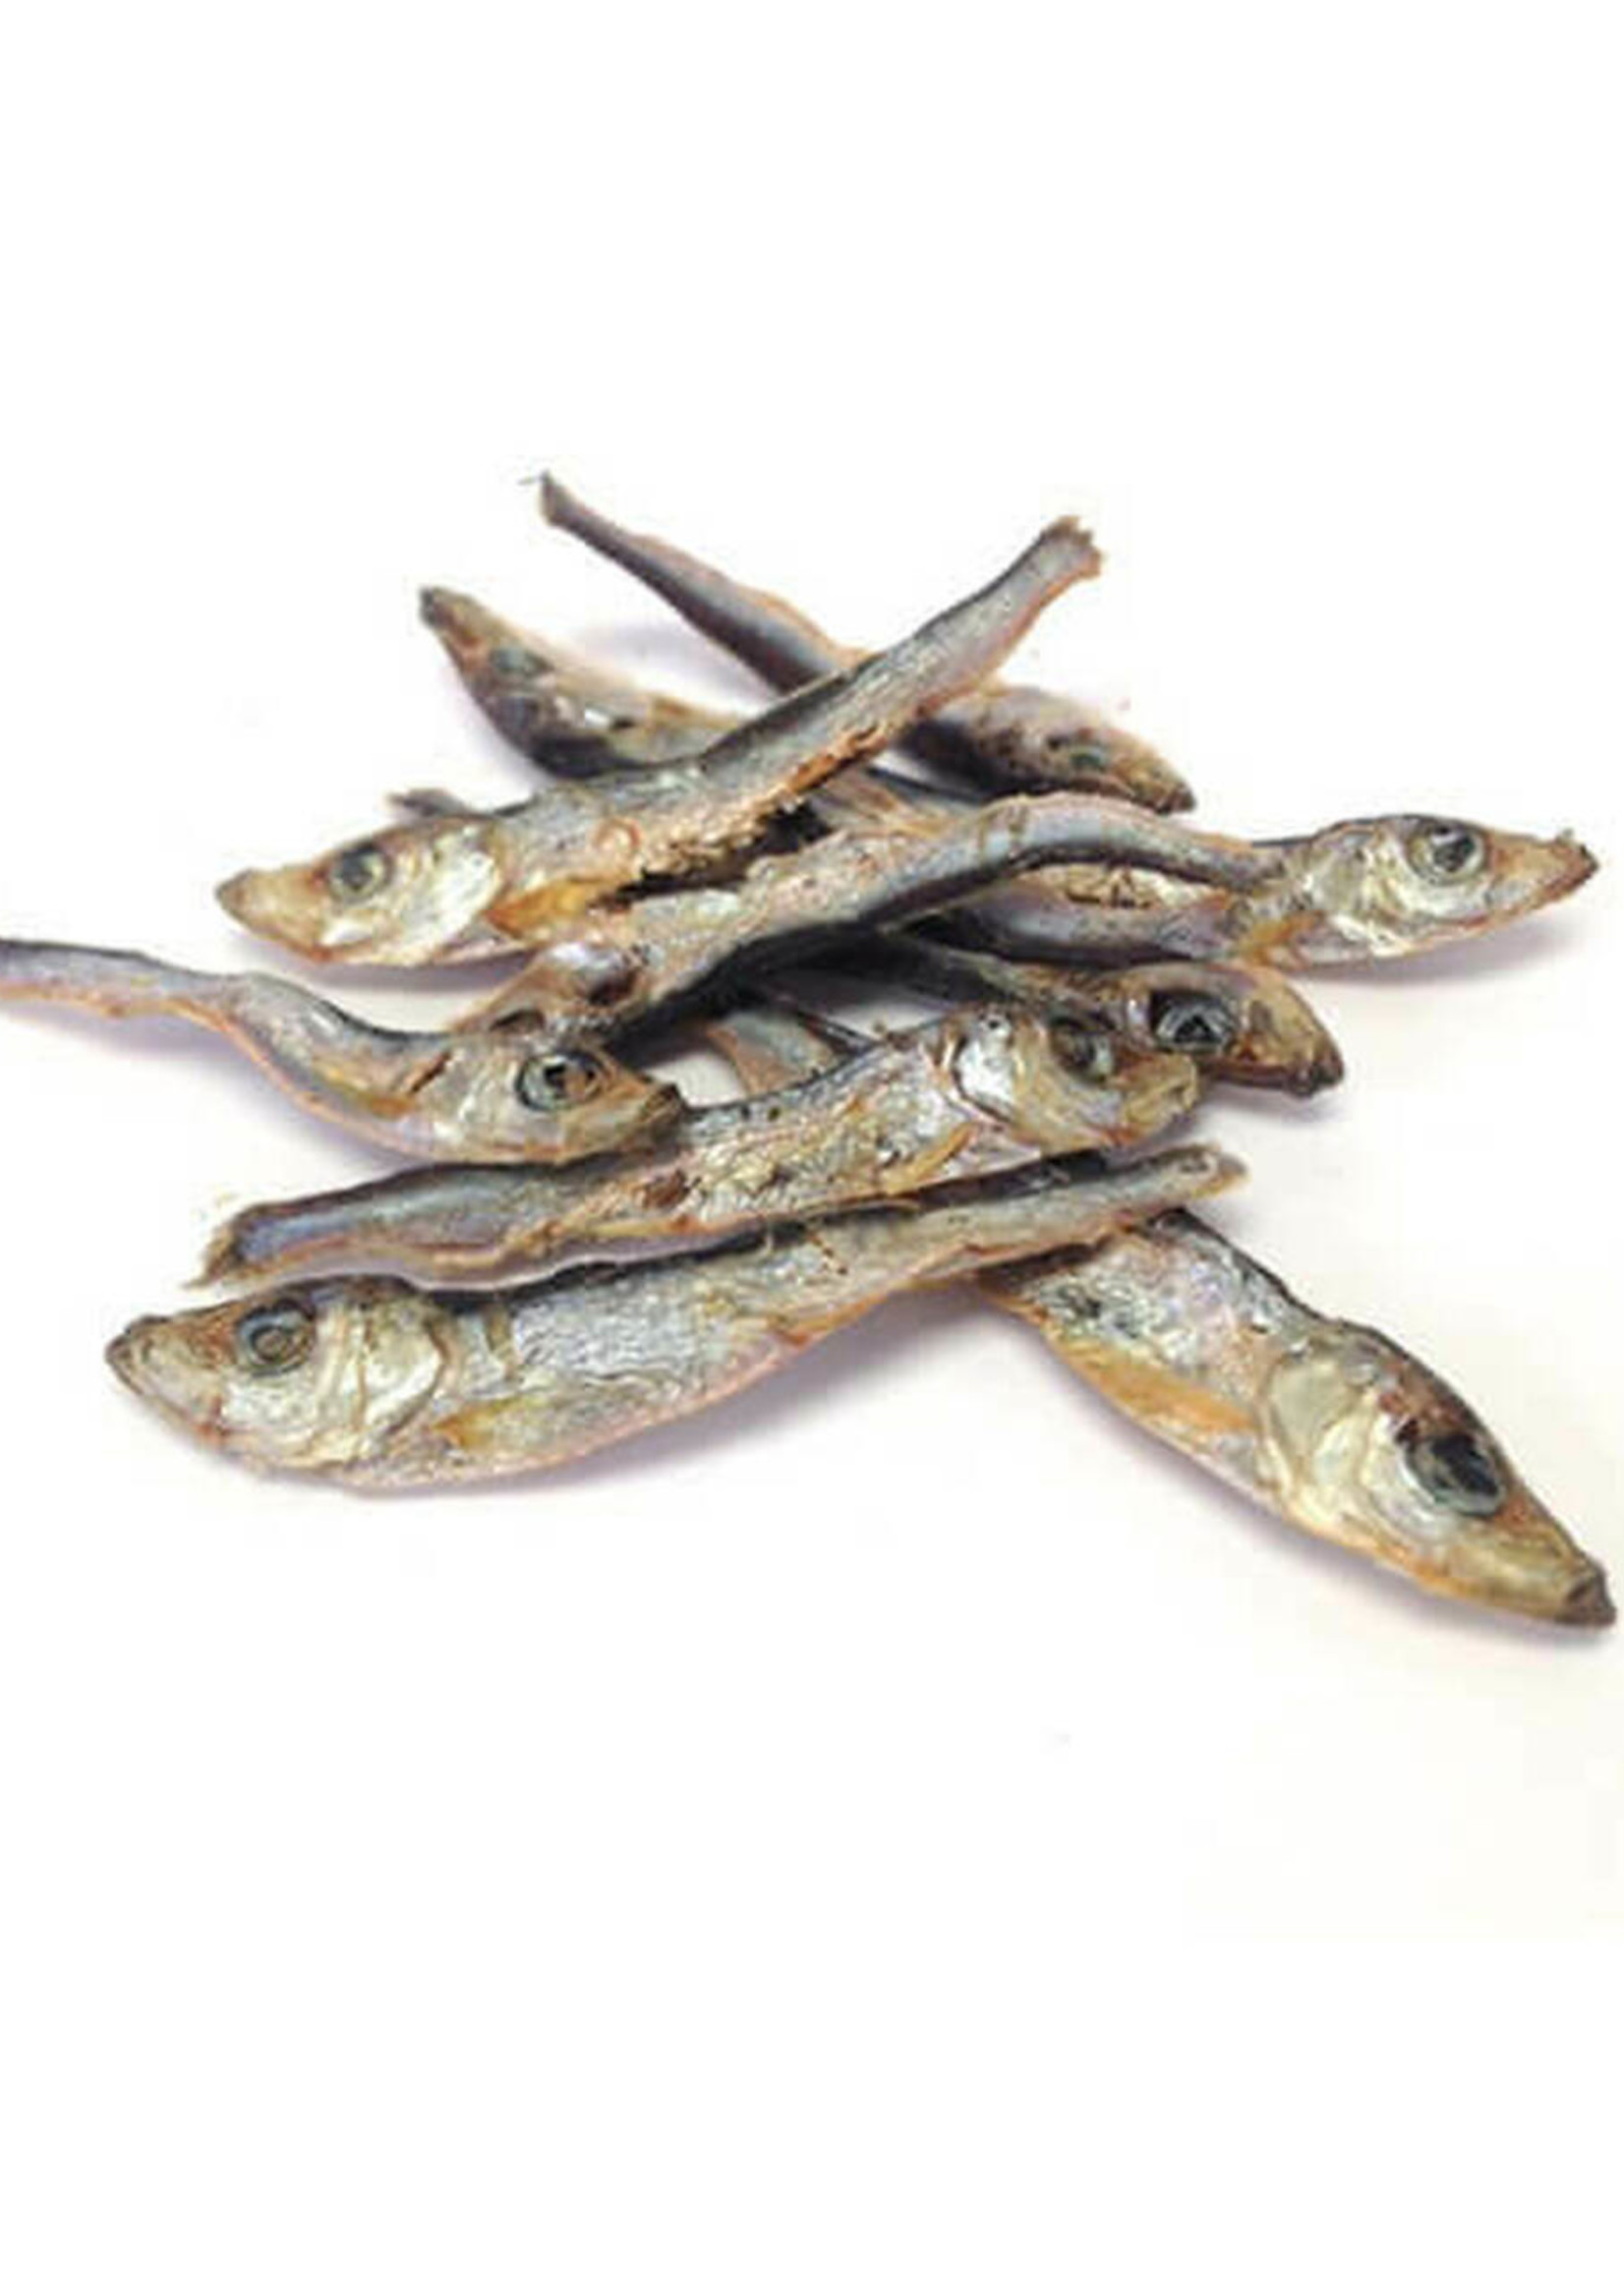 Granville Island - With Love and Fishes (Dehydrated Sardines)